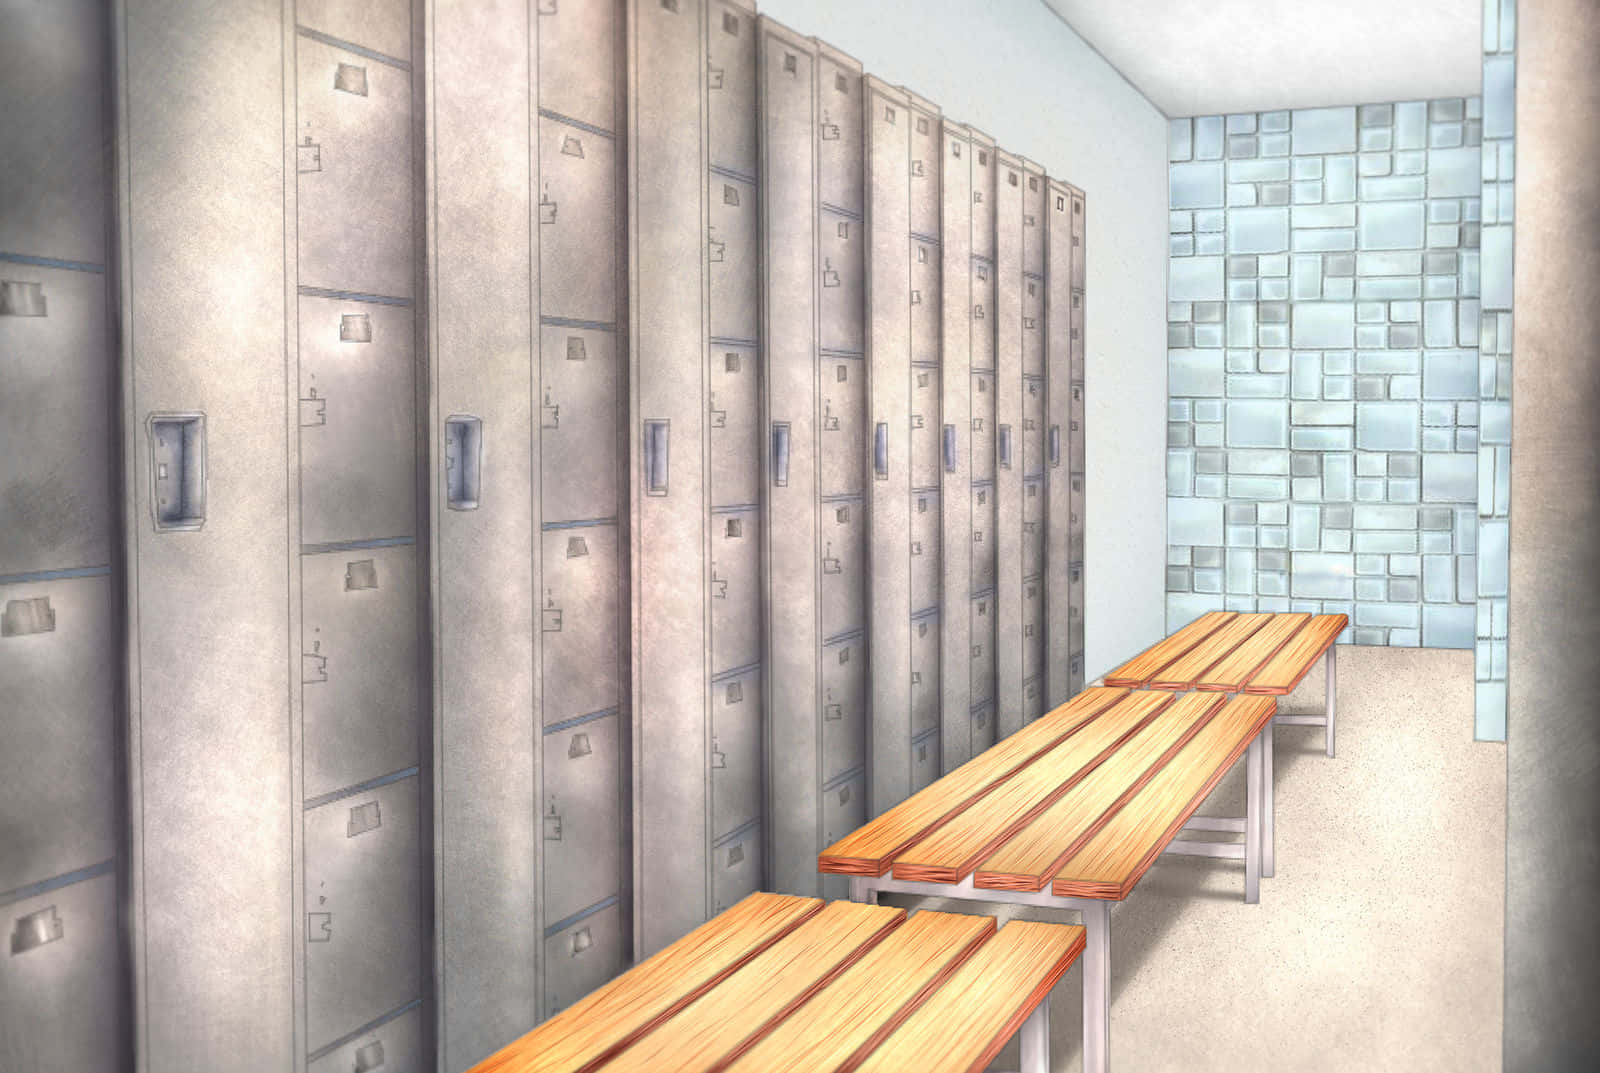 Image  A room filled with colorful lockers and a single person in the background